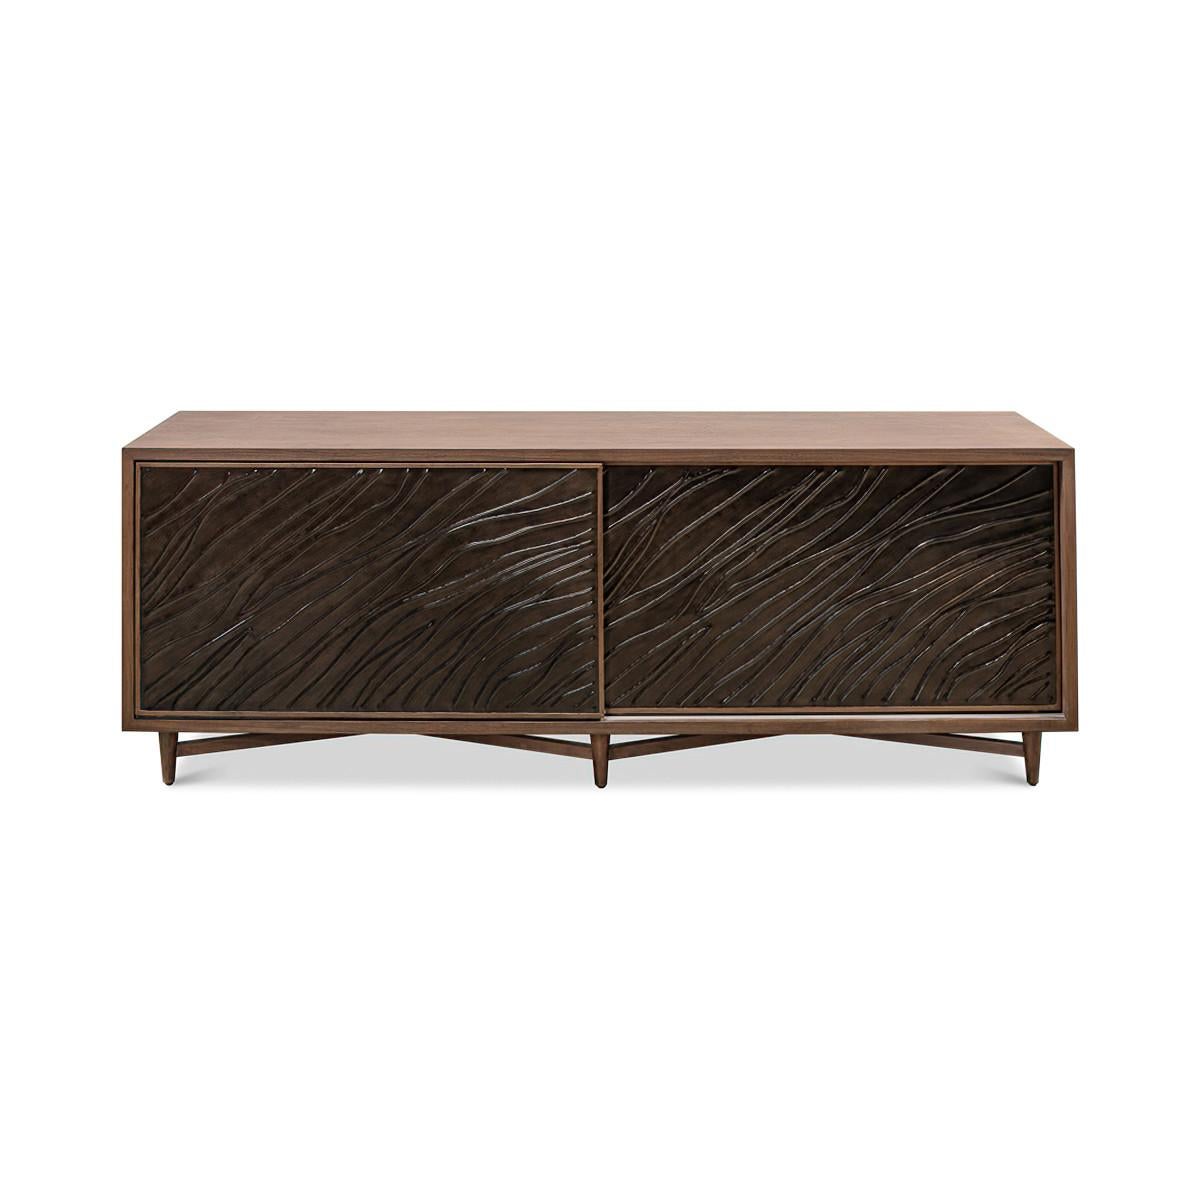 Mid-Century Modern Media storage cabinet, with two metal sliding doors, a knotty walnut frame in a brown transitional finish, the interior with one drawer and adjustable shelf, raised on round tapered legs with a stretcher.

Dimensions: 76